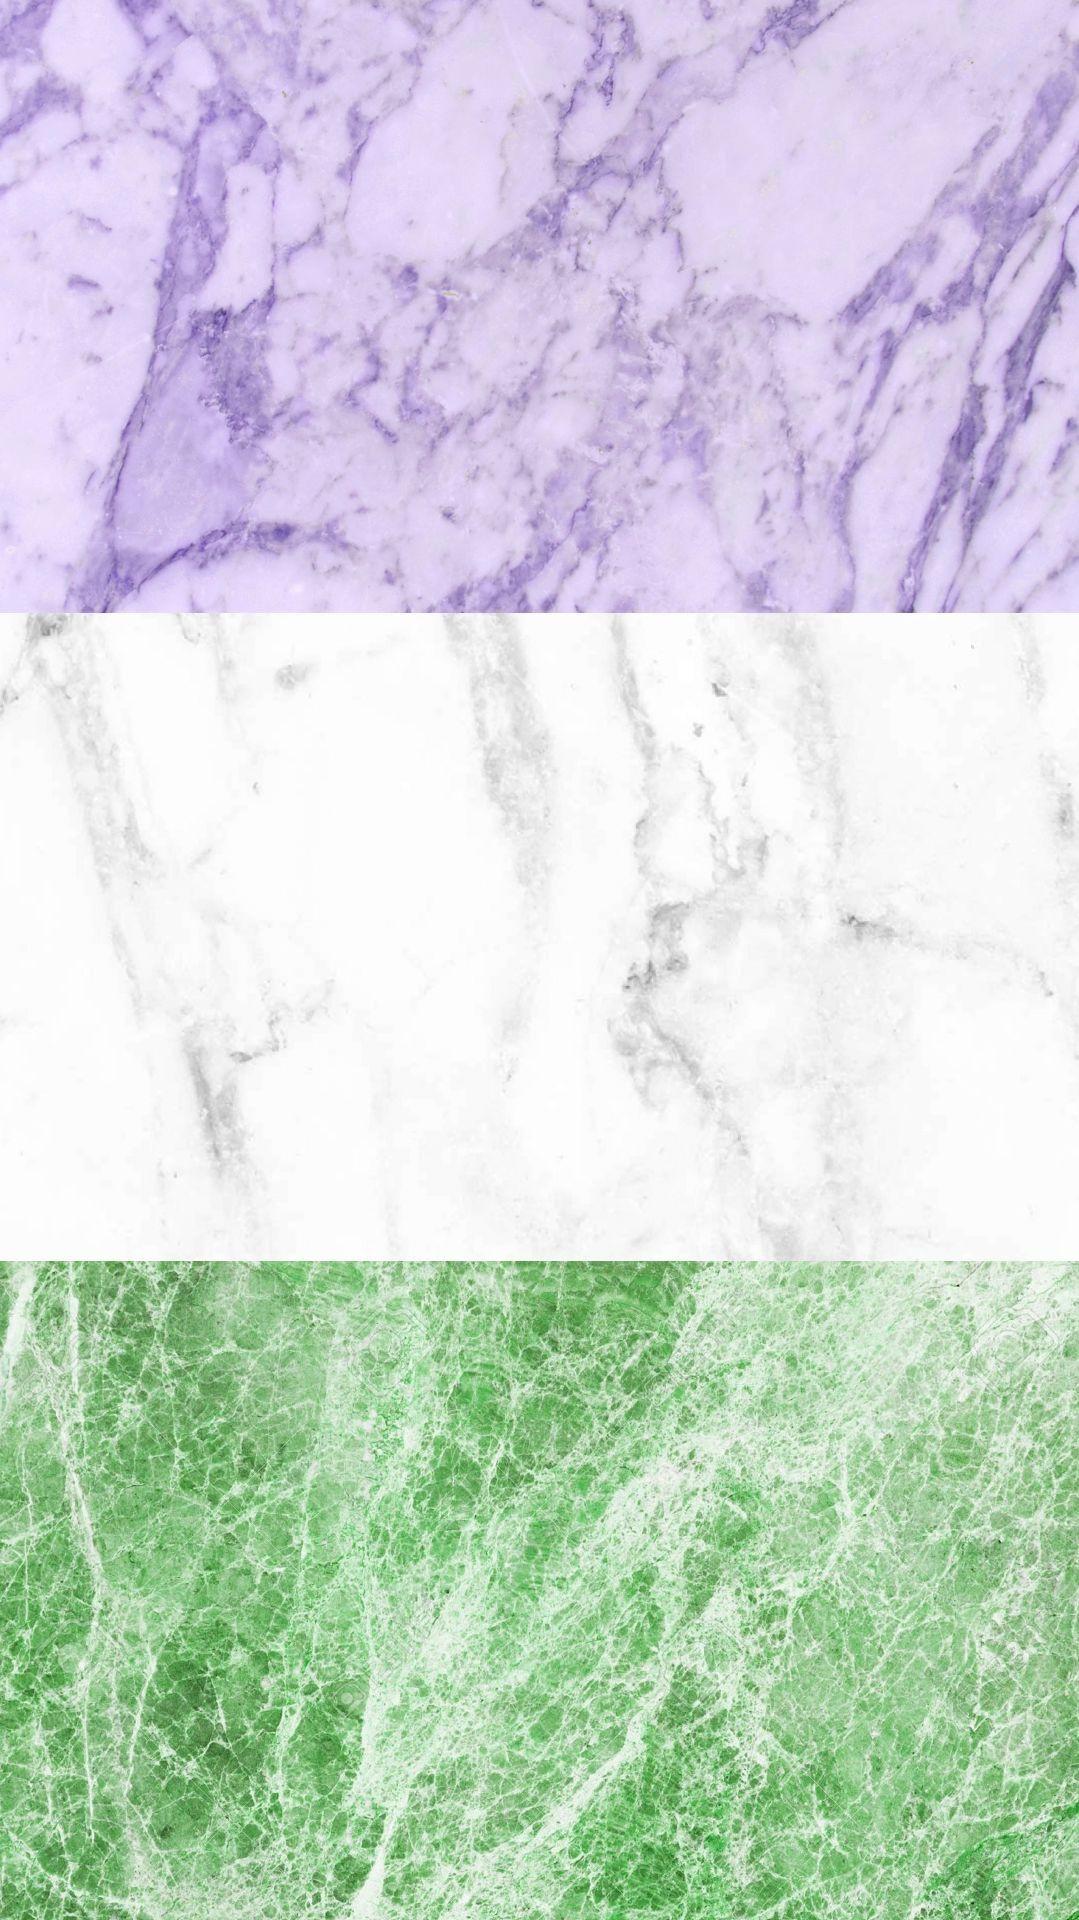 I hope you like the genderqueer pride marble wallpaper I made